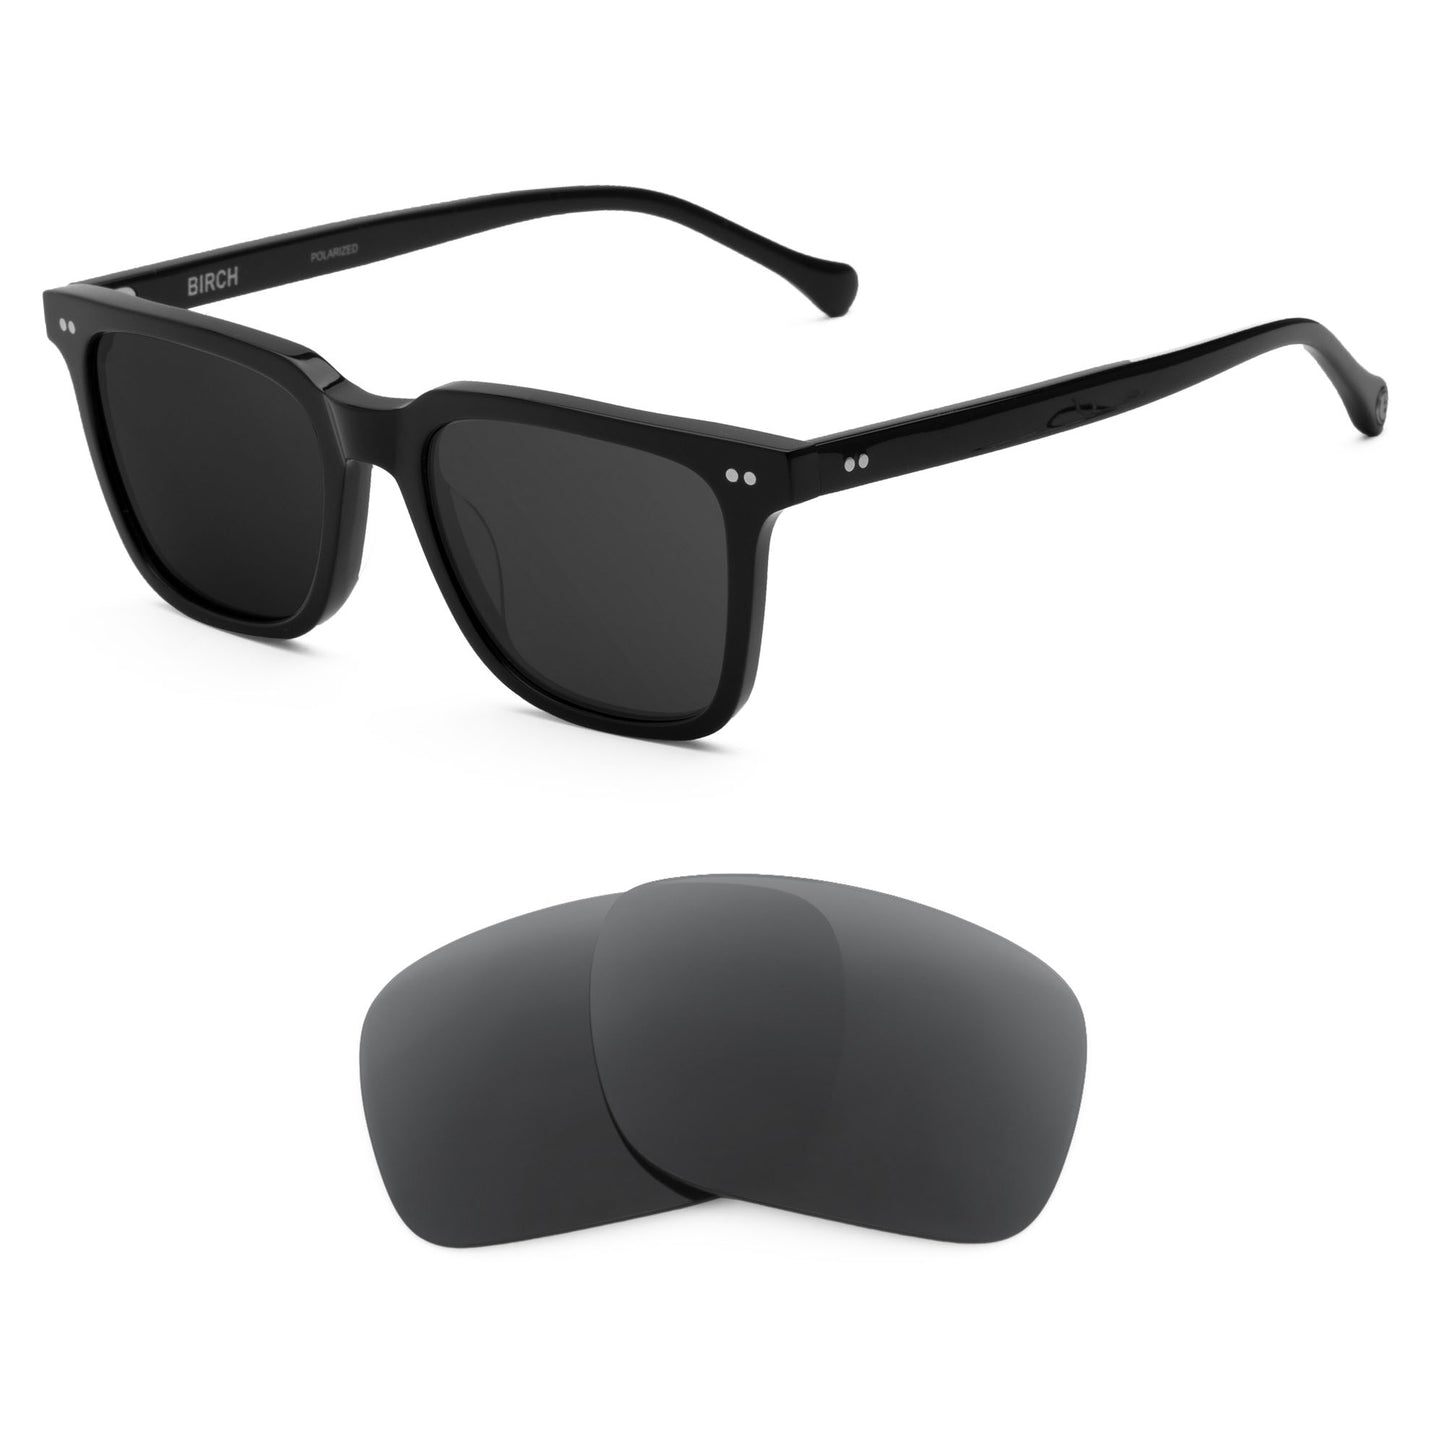 Electric Birch sunglasses with replacement lenses